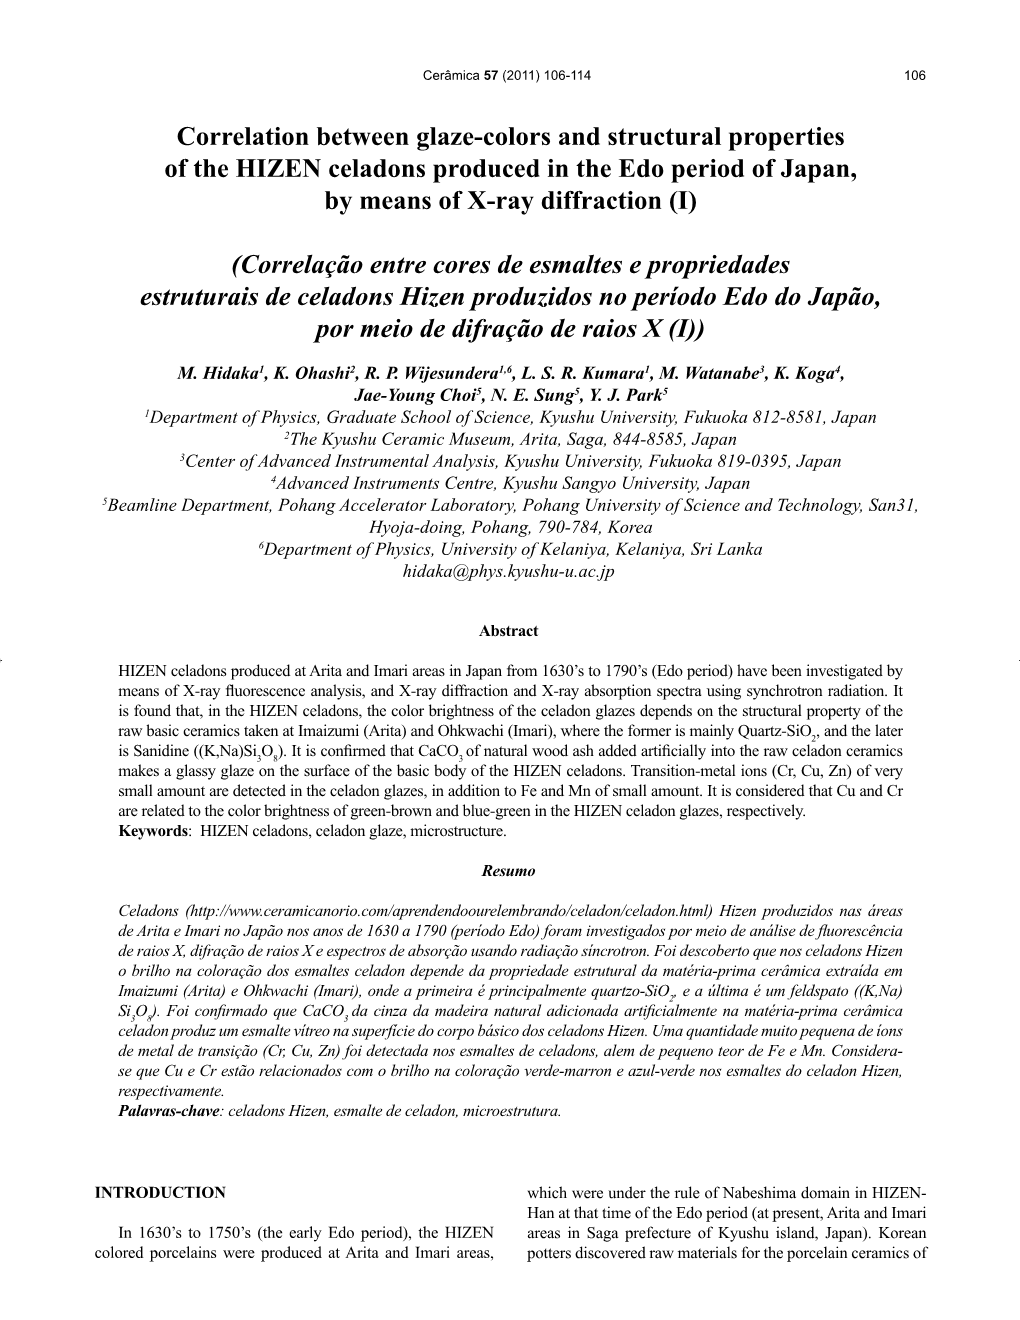 Correlation Between Glaze-Colors and Structural Properties of the HIZEN Celadons Produced in the Edo Period of Japan, by Means of X-Ray Diffraction (І)